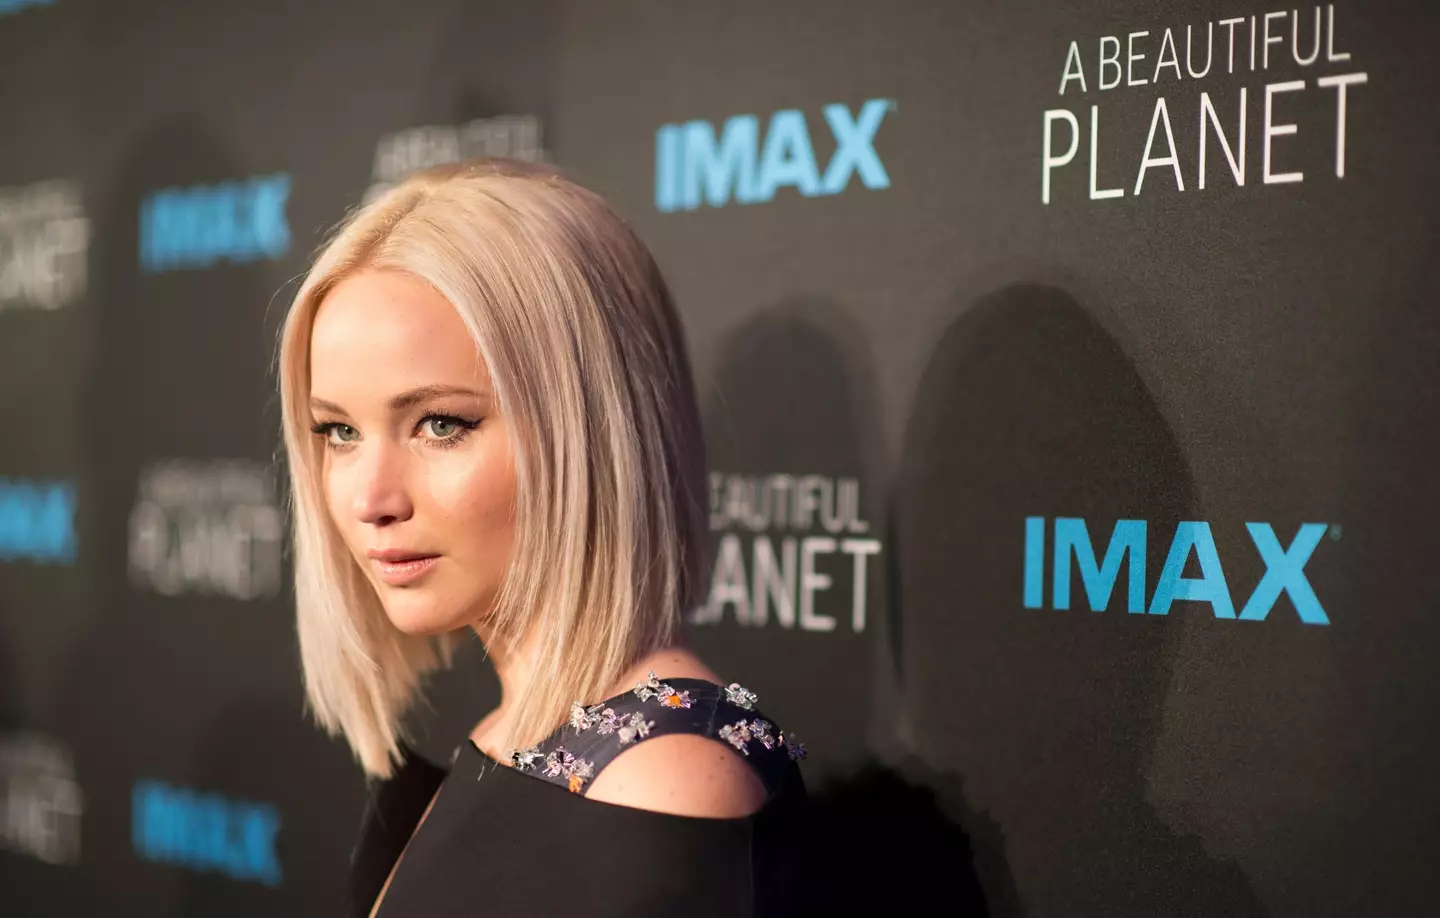 Jennifer Lawrence welcomed her first child with her husband, Cooke.